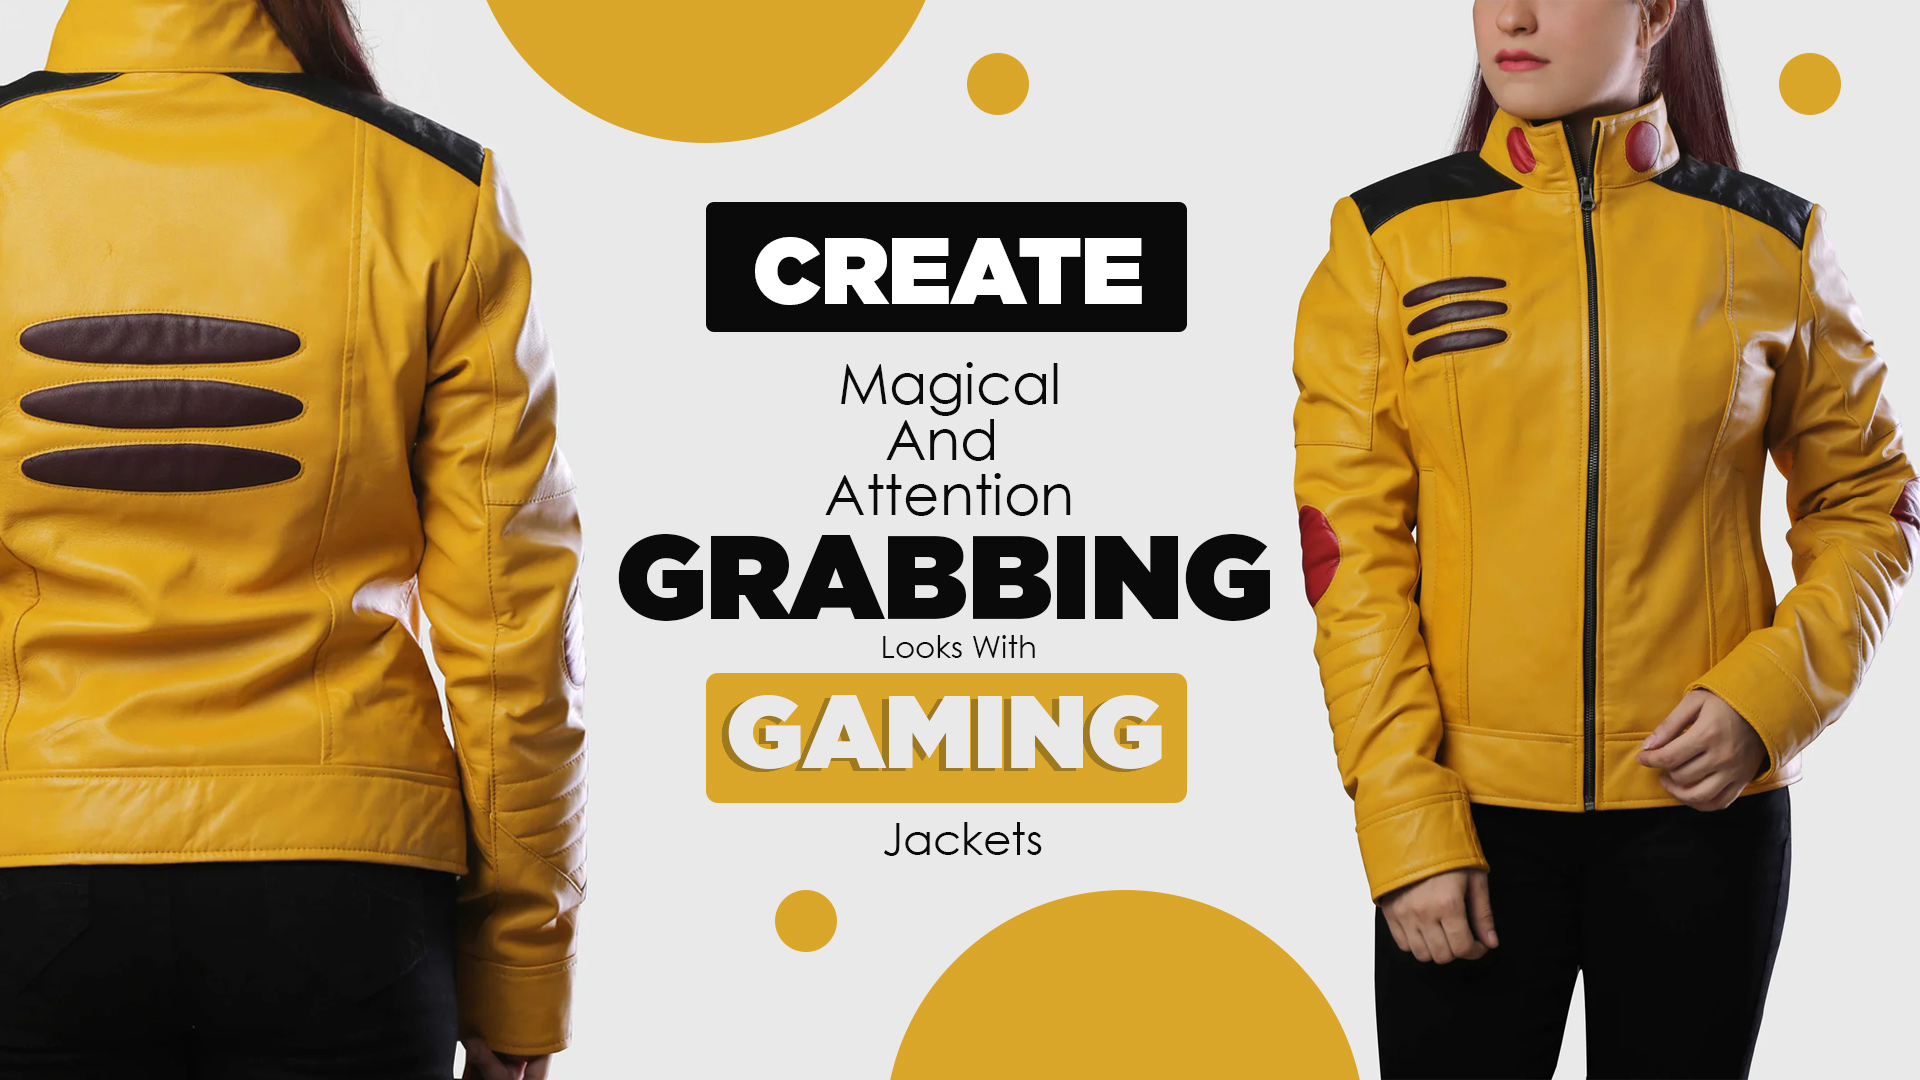 Create Magical And Attention-grabbing Looks With Gaming Jackets